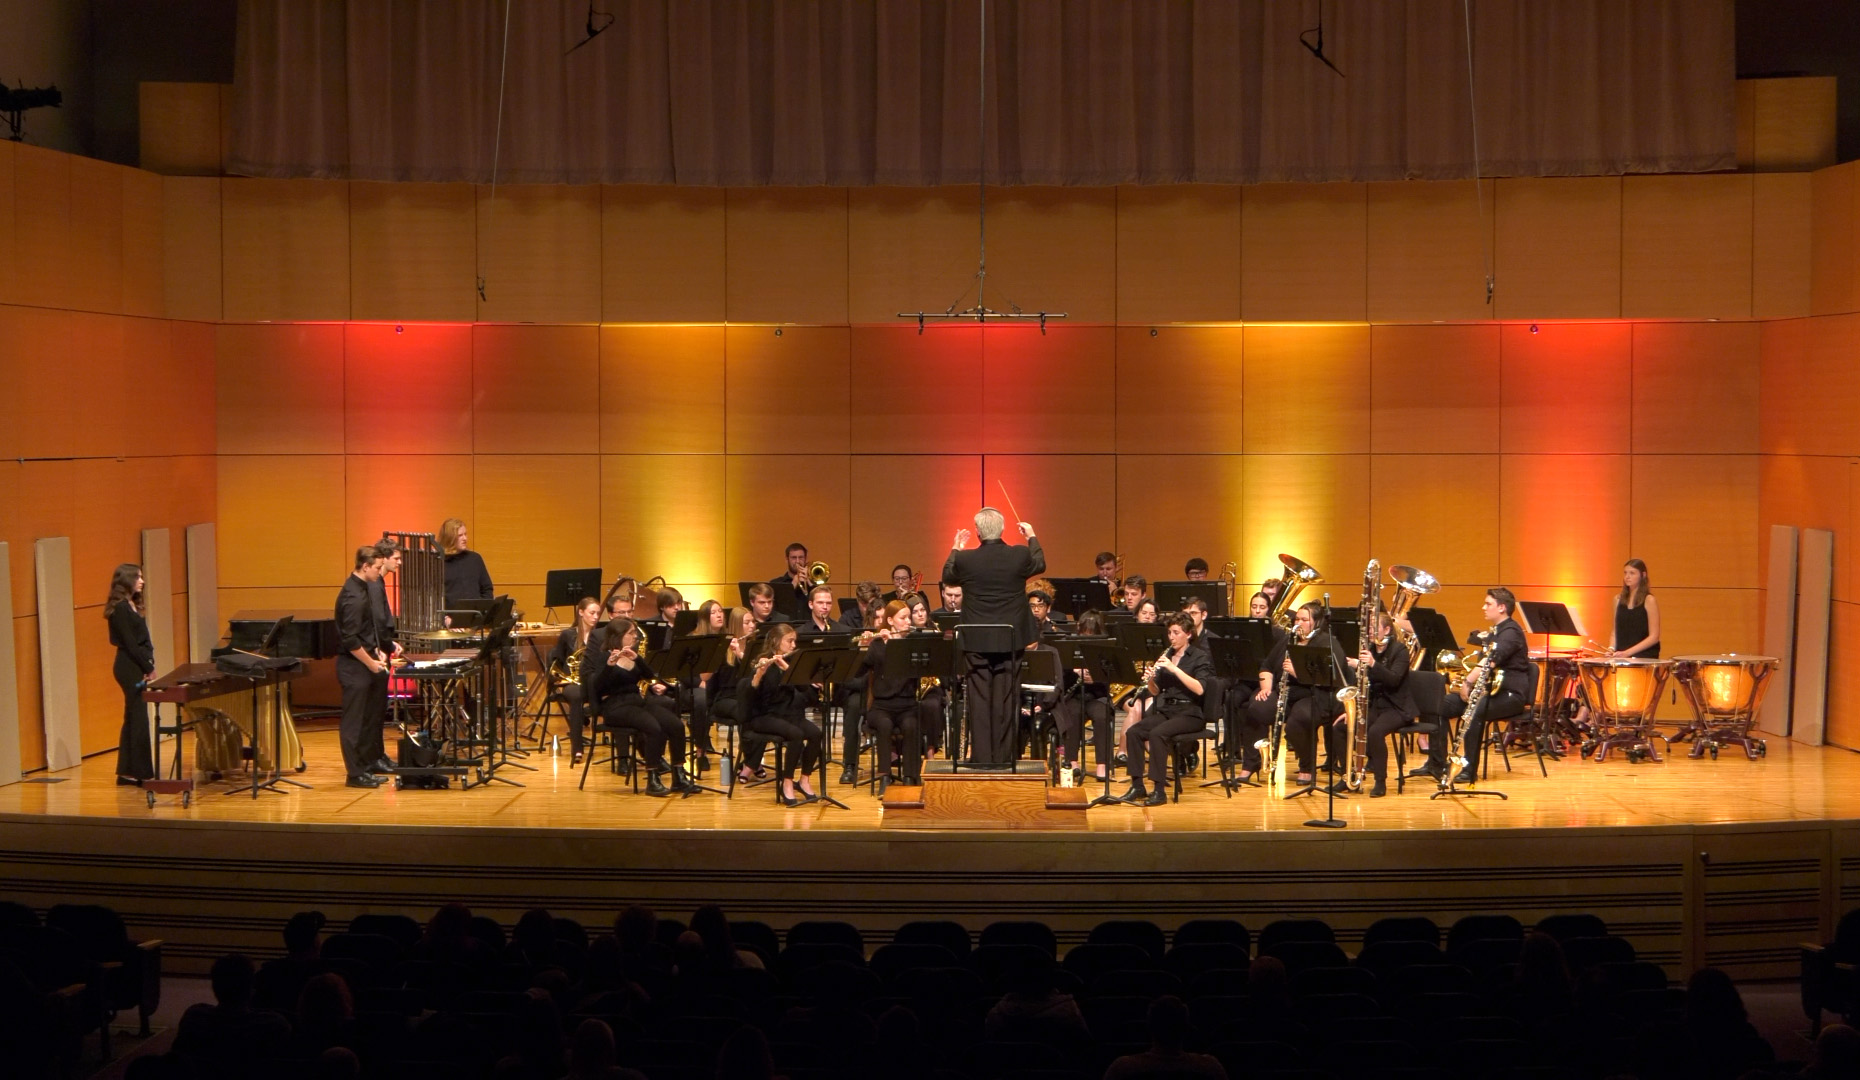 The CMU Wind Symphony, under the direction of Dr. James Batchelor, is performing on stage at Staples Family Concert Hall.